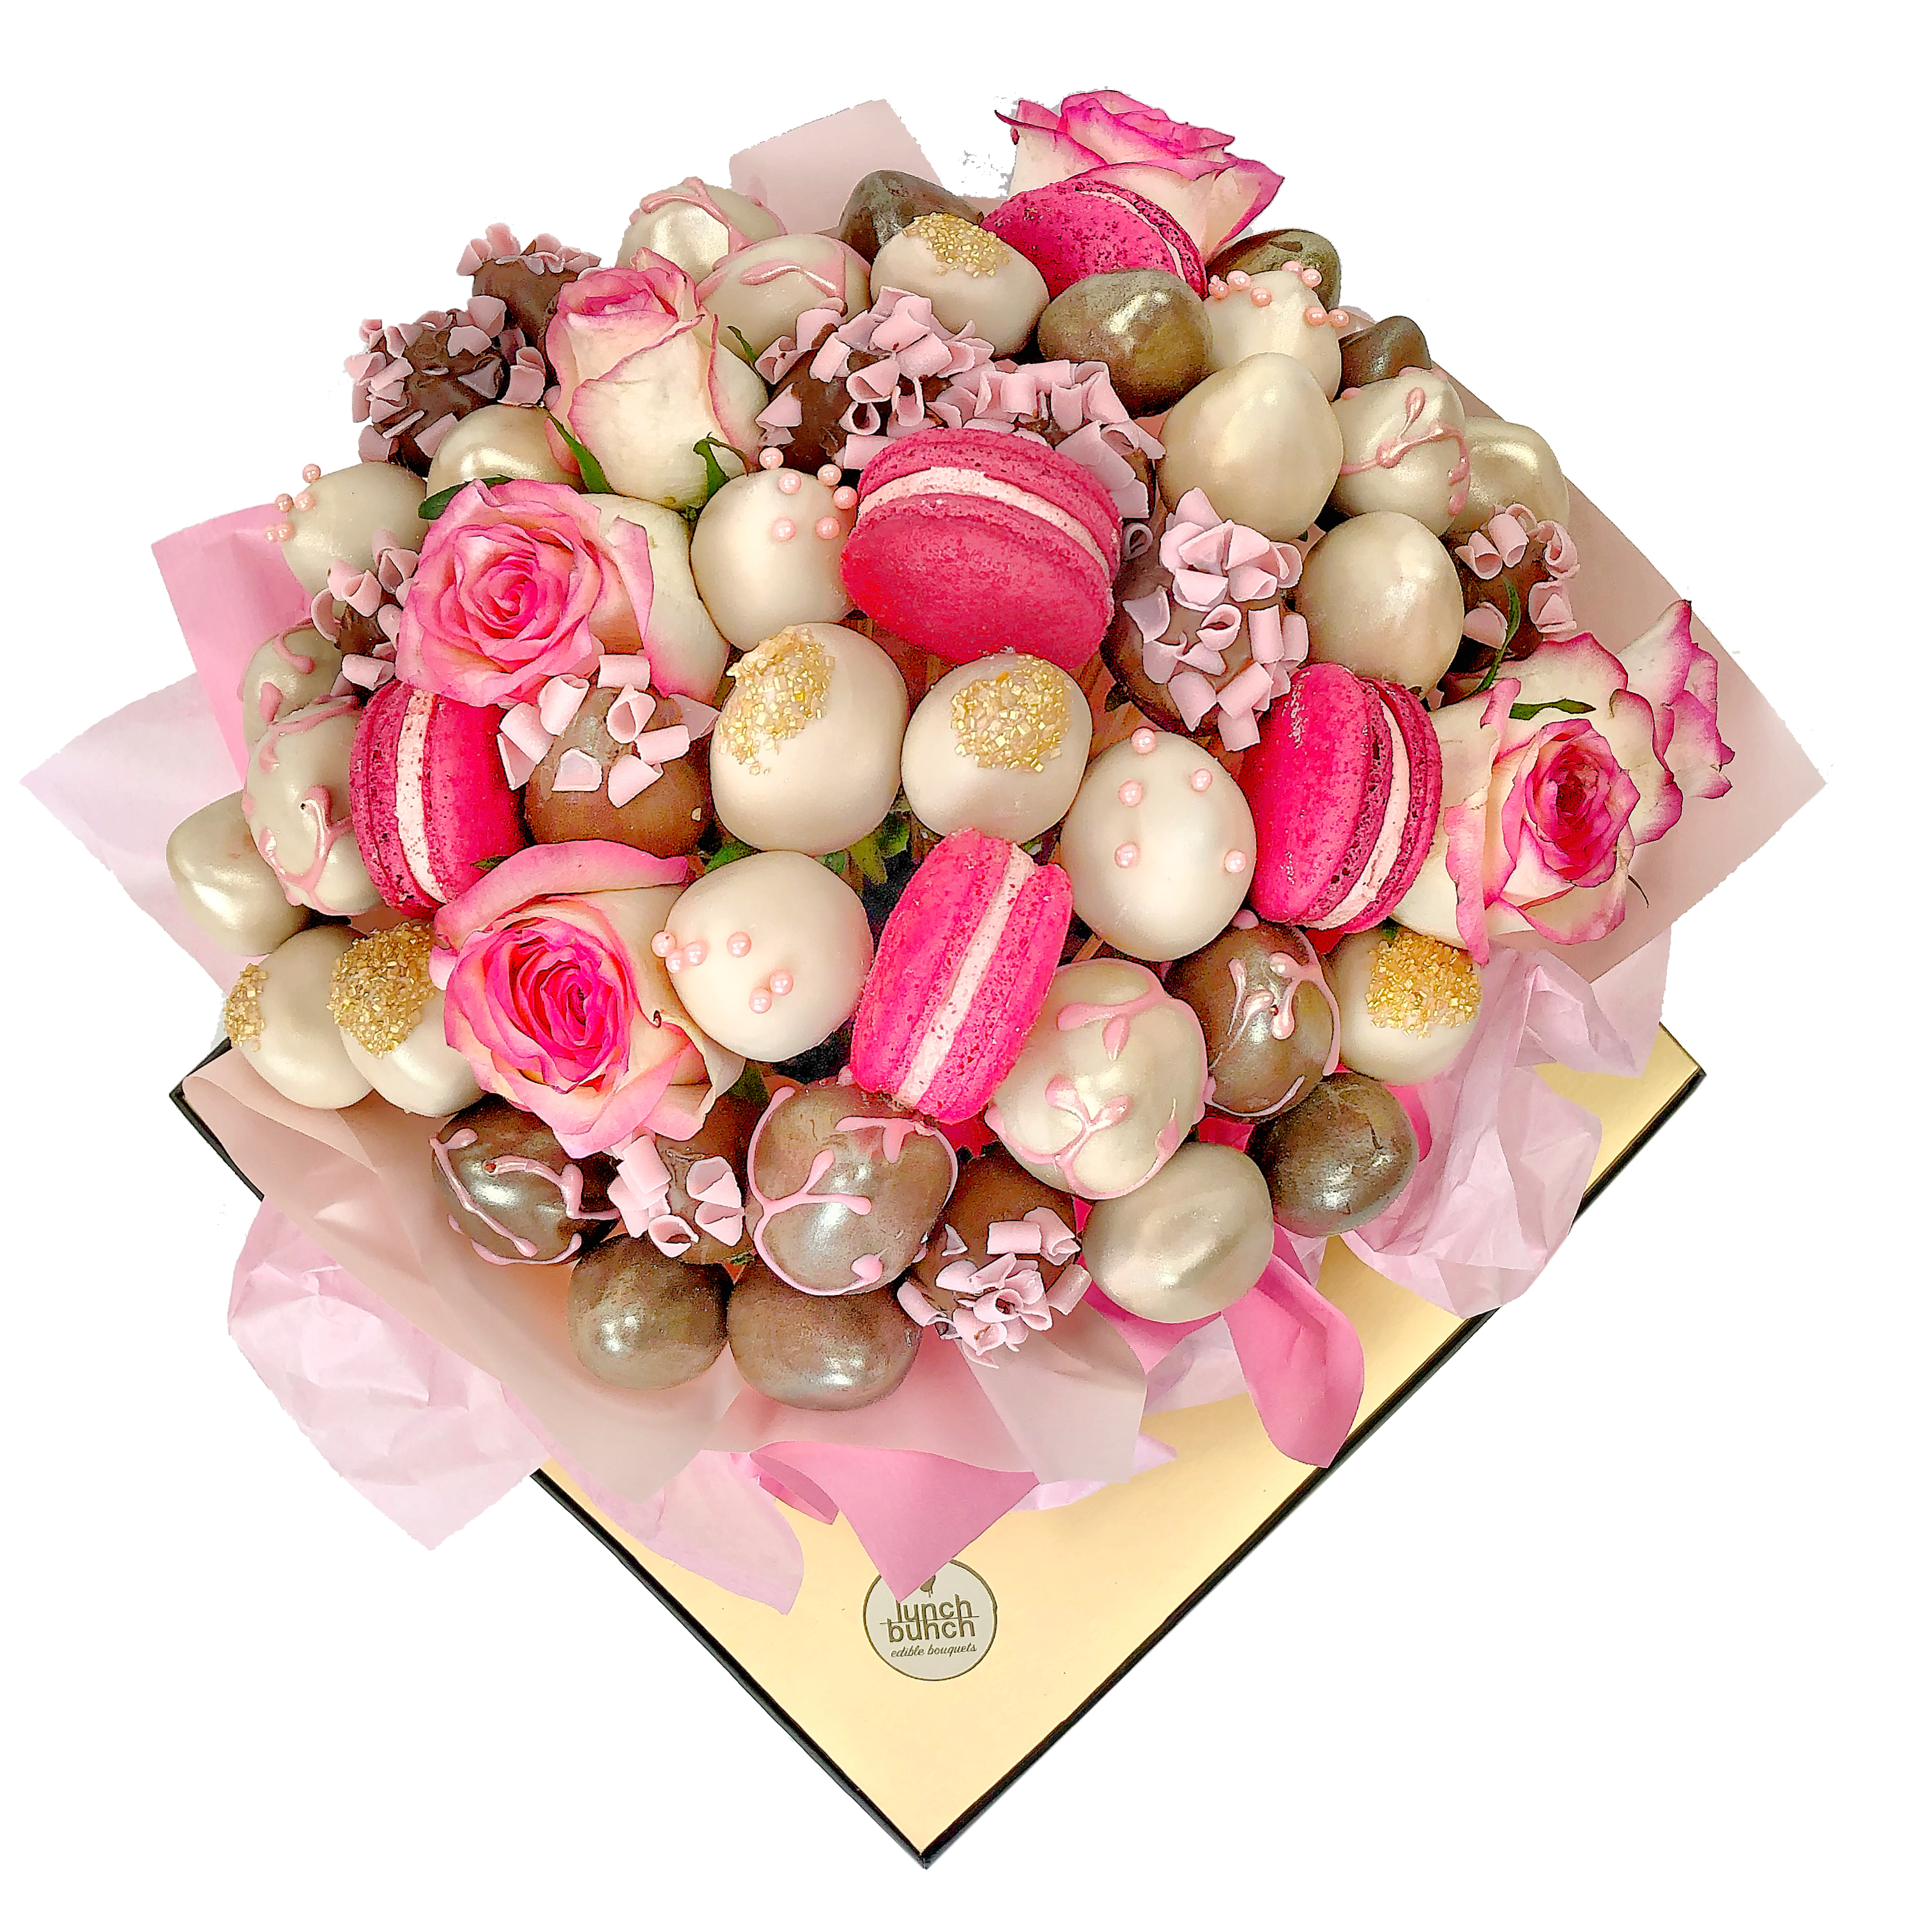 Blooms & Macarons Chocolate Bouquet edible sweet blooms same-day delivery chocolate gift treat box birthday present